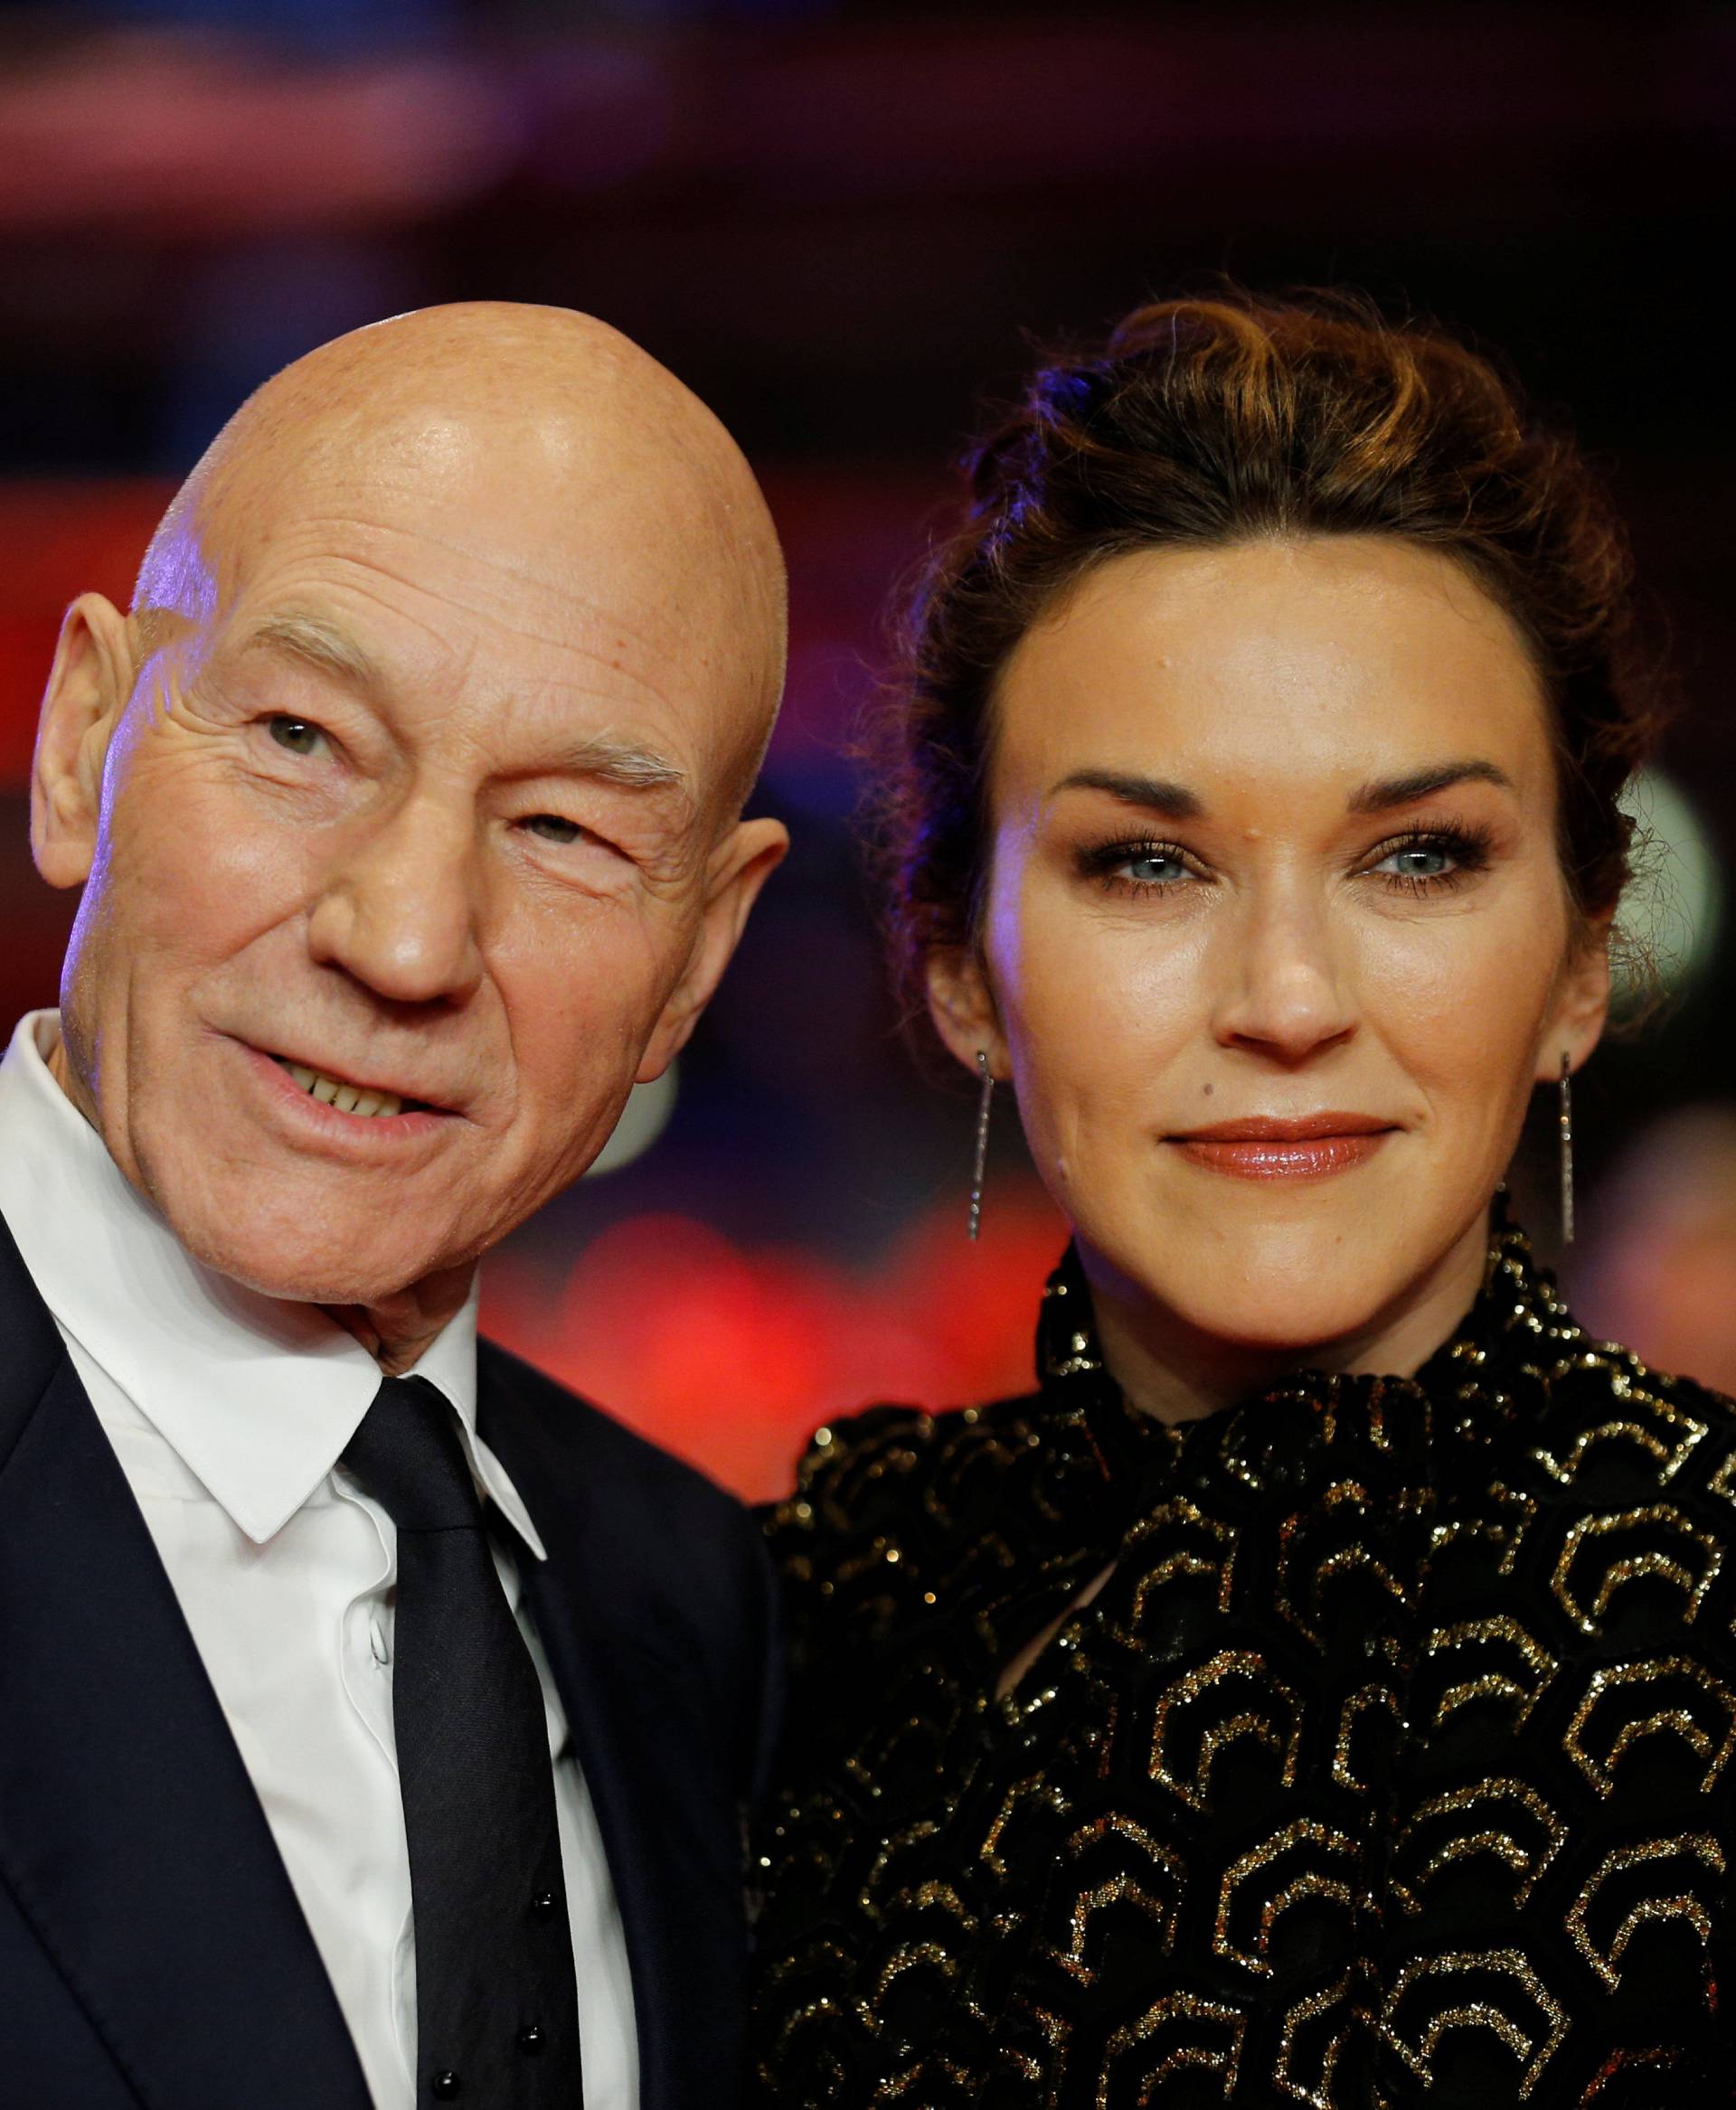 Actor Patrick Stewart and his wife Sunny Ozel arrive for the screening of the movie 'Logan' at the 67th Berlinale International Film Festival in Berlin